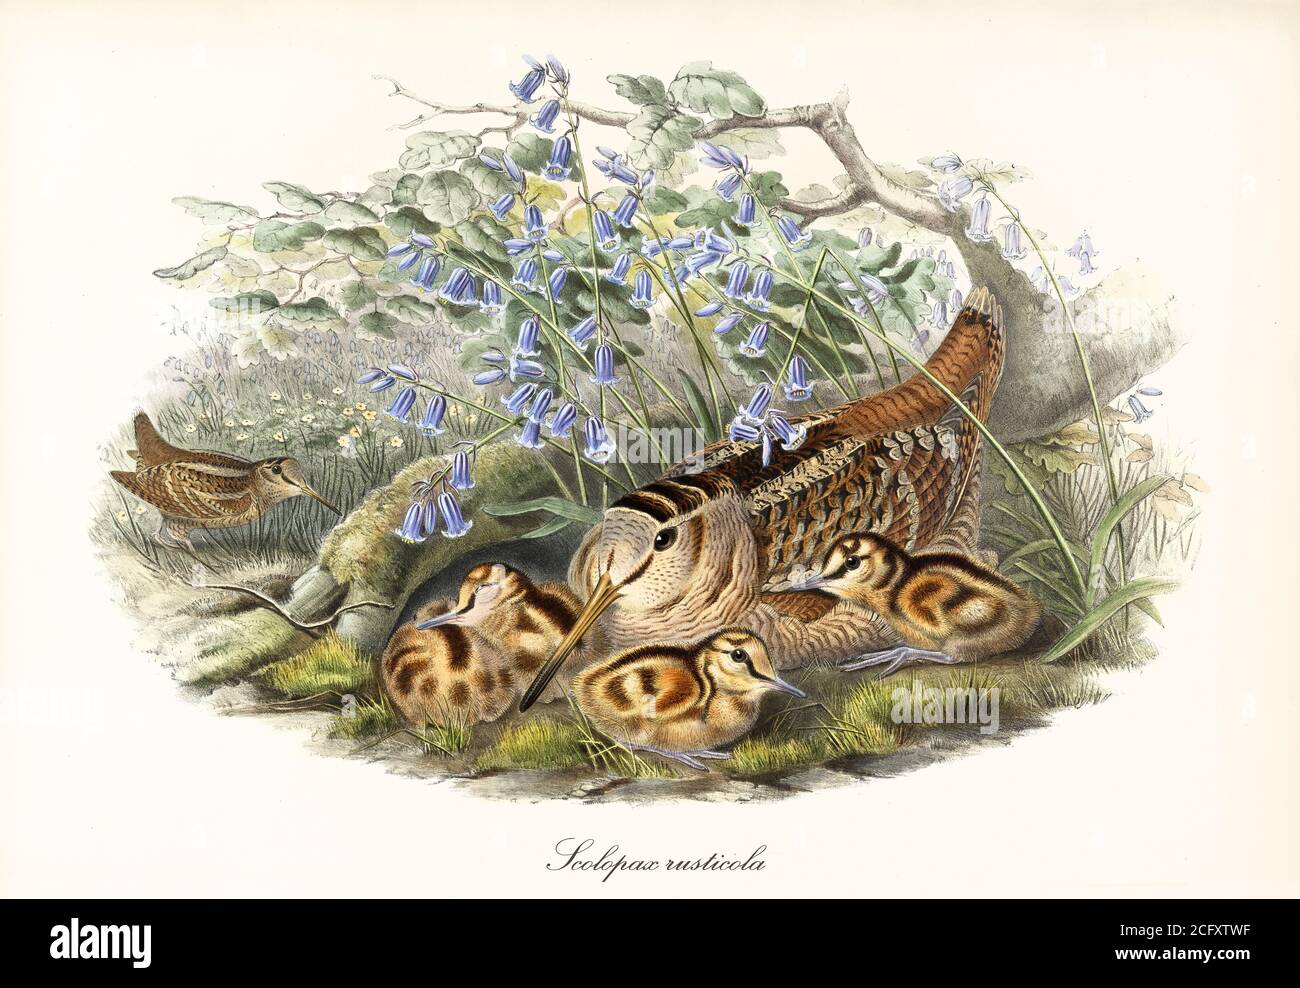 'Eurasian Woodcock (Scolopax rusticola) bird hided in vegetation to protect children near to another exemplar. Art by John Gould London 1862-1873' Stock Photo